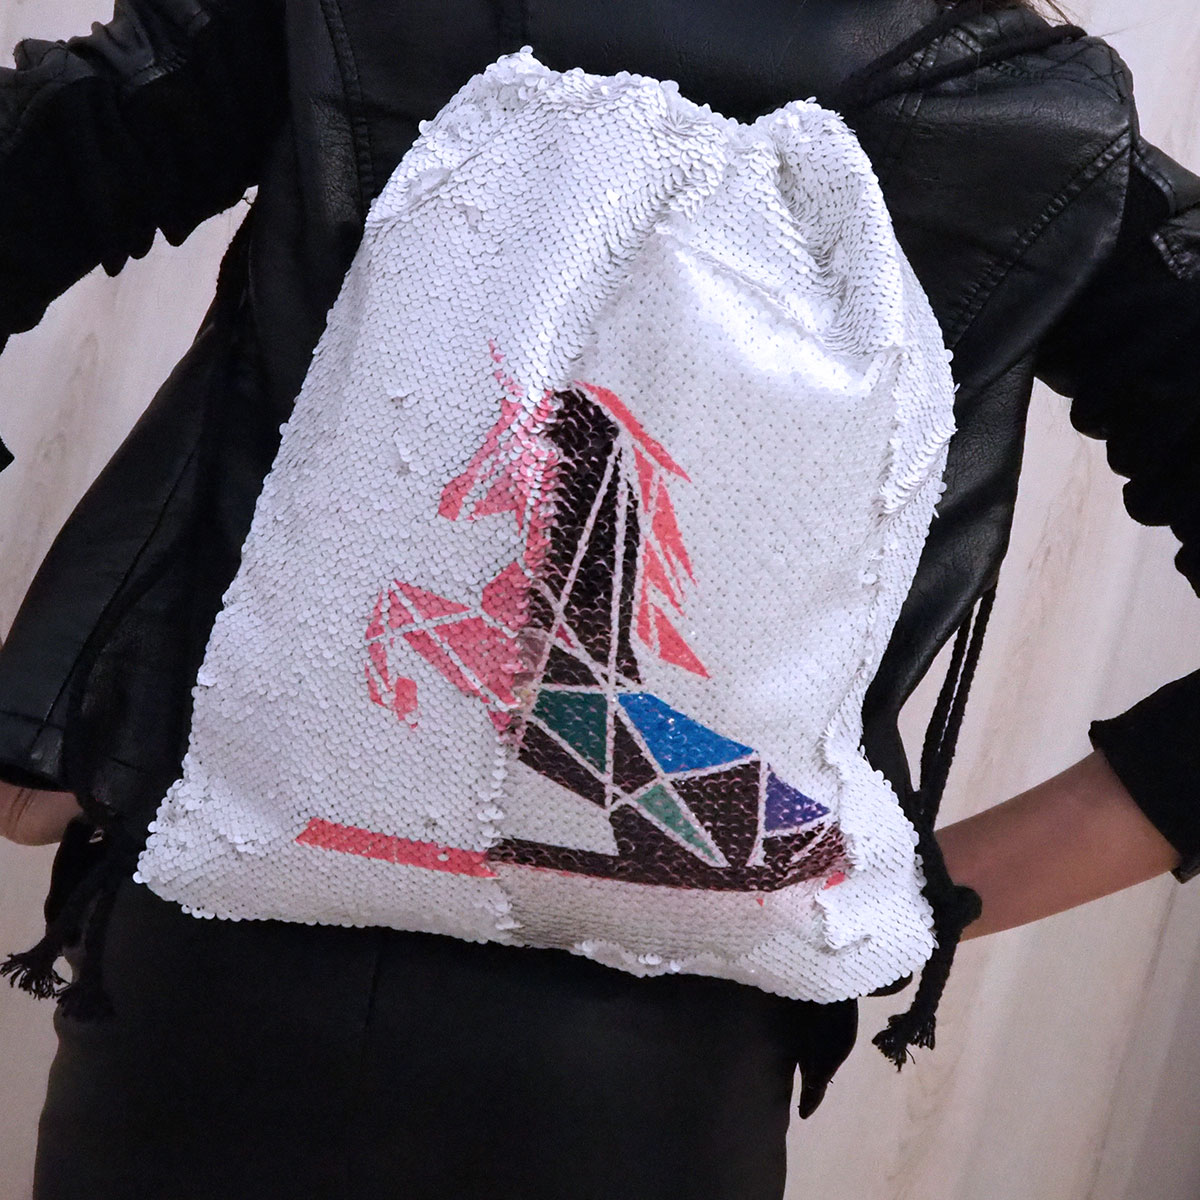 Shoe bag with two-side sequins for sublimation